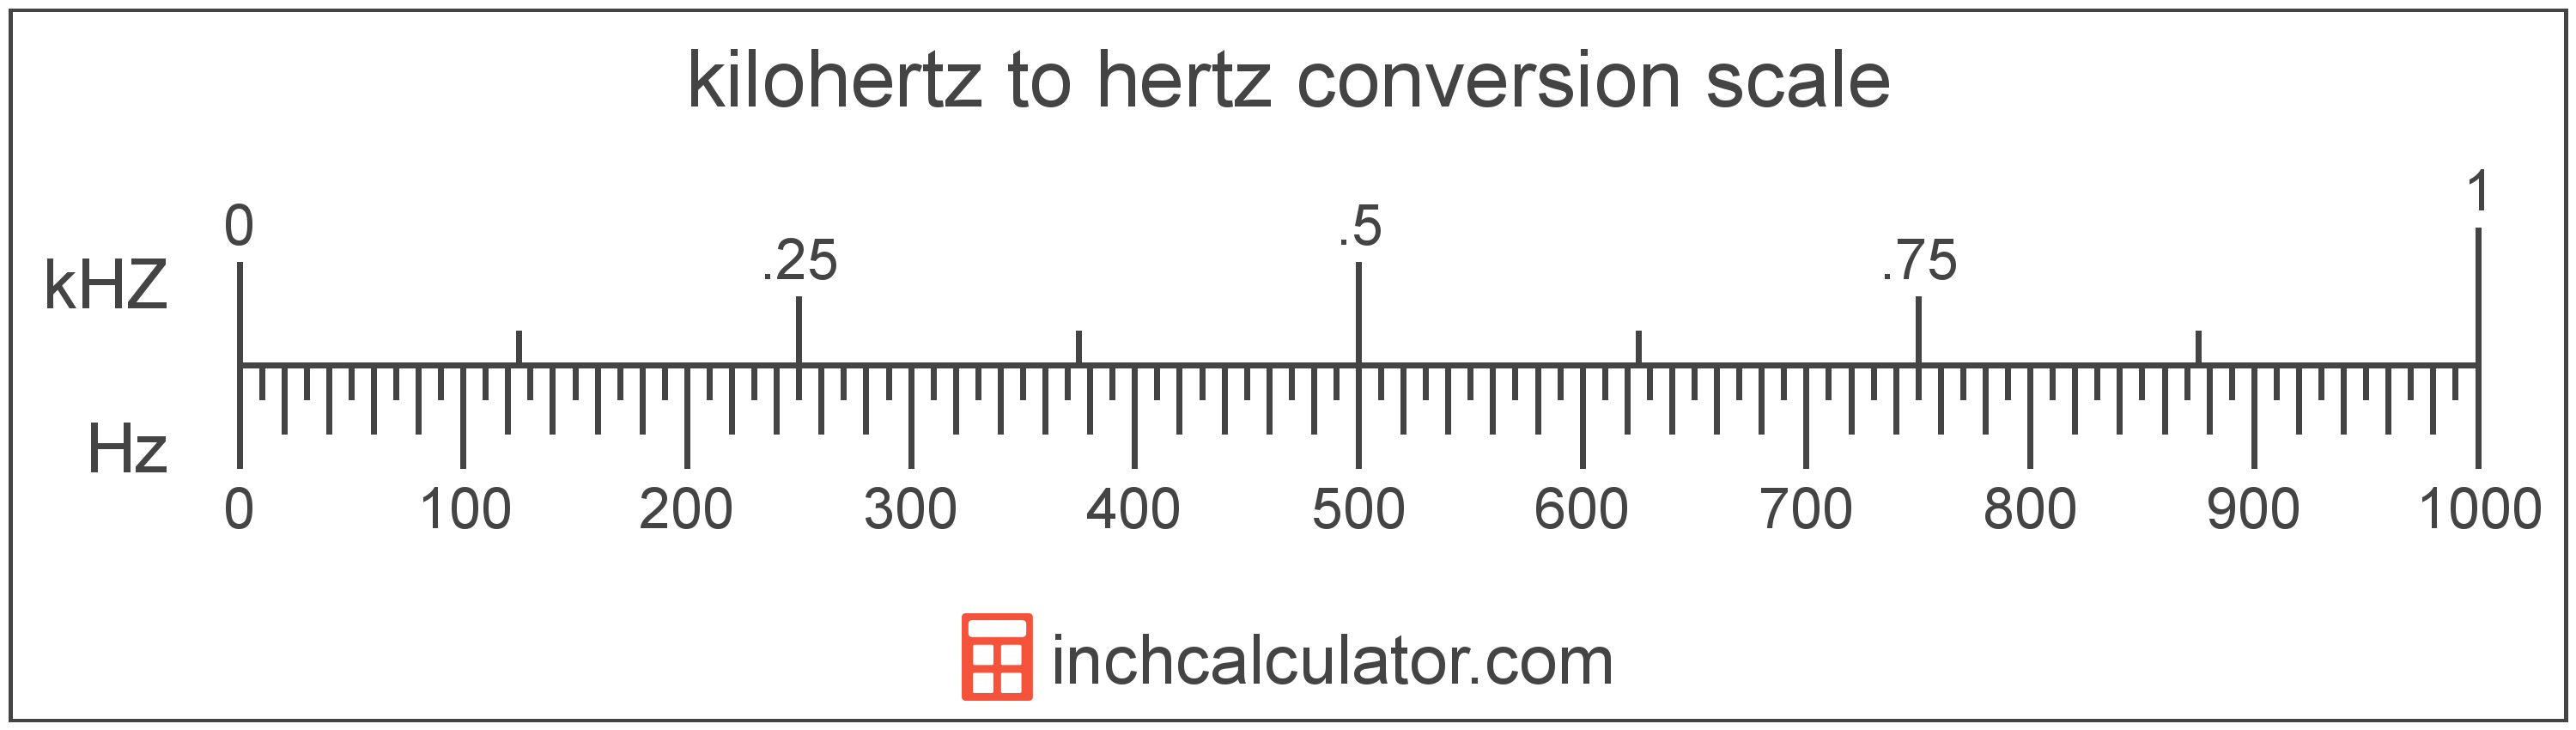 conversion scale showing hertz and equivalent kilohertz frequency values